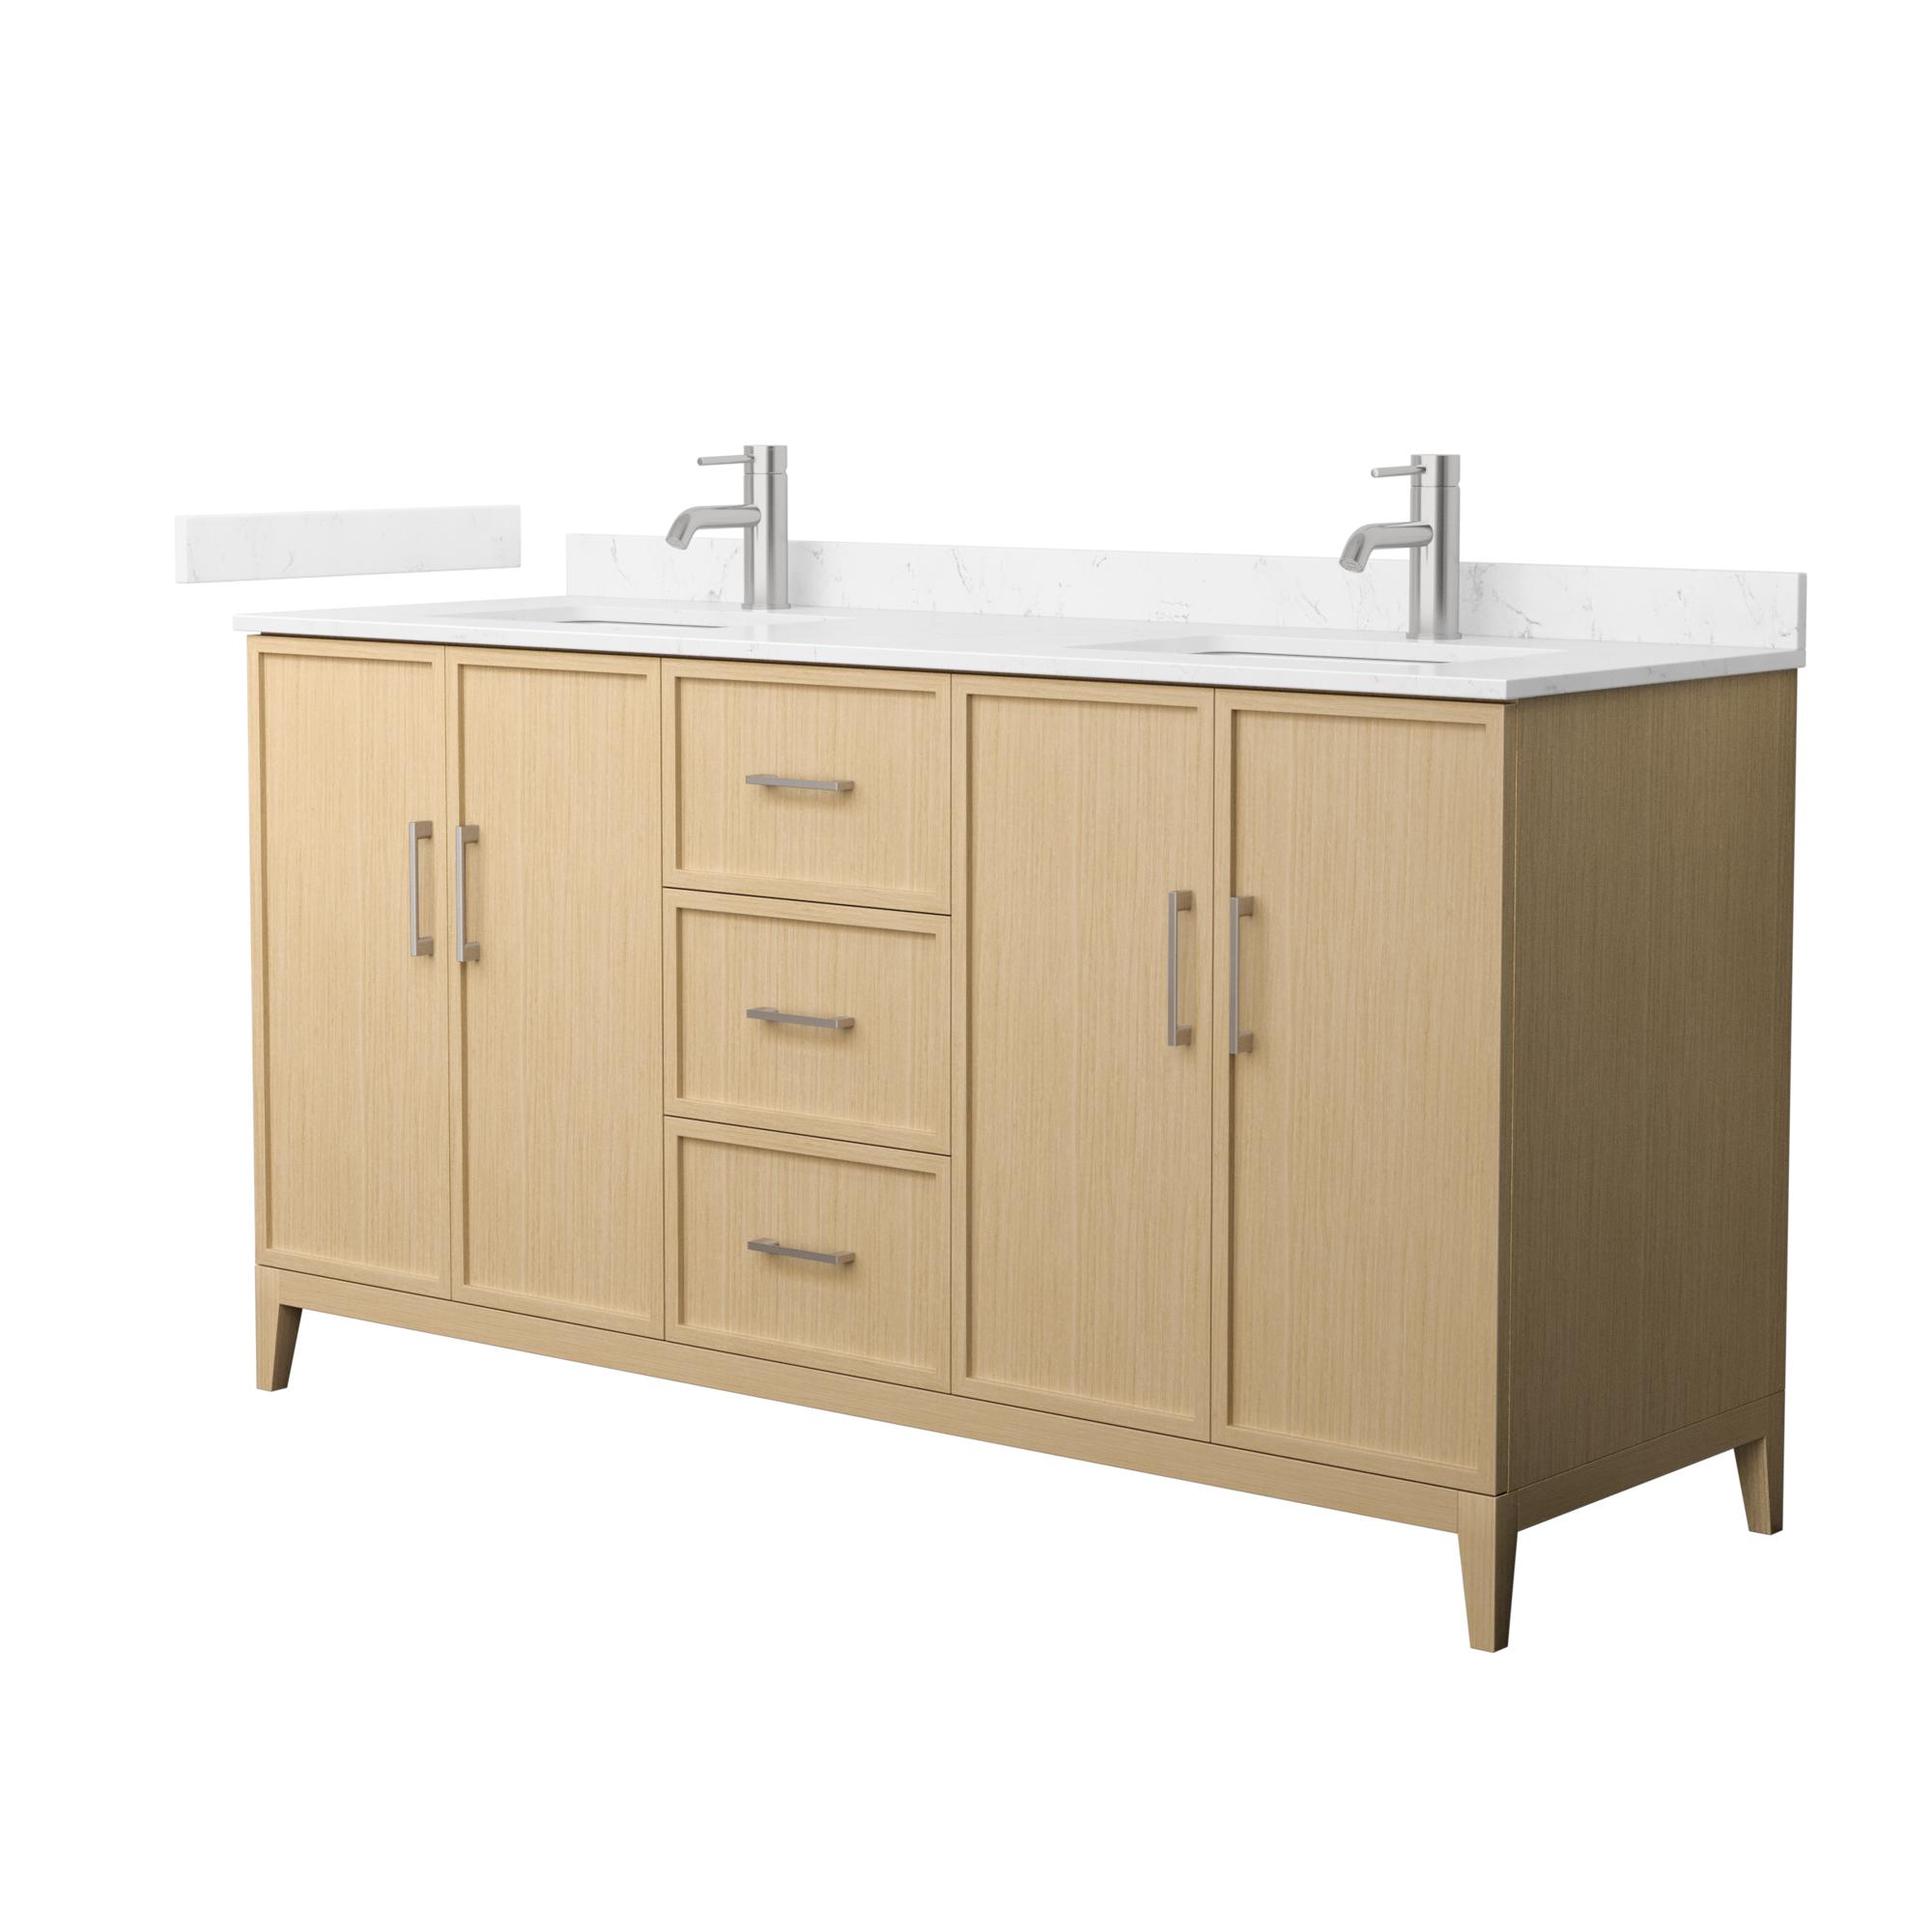 66" Transitional Double Vanity Base in White Oak, 7 Top Options with 2 Hardware Option